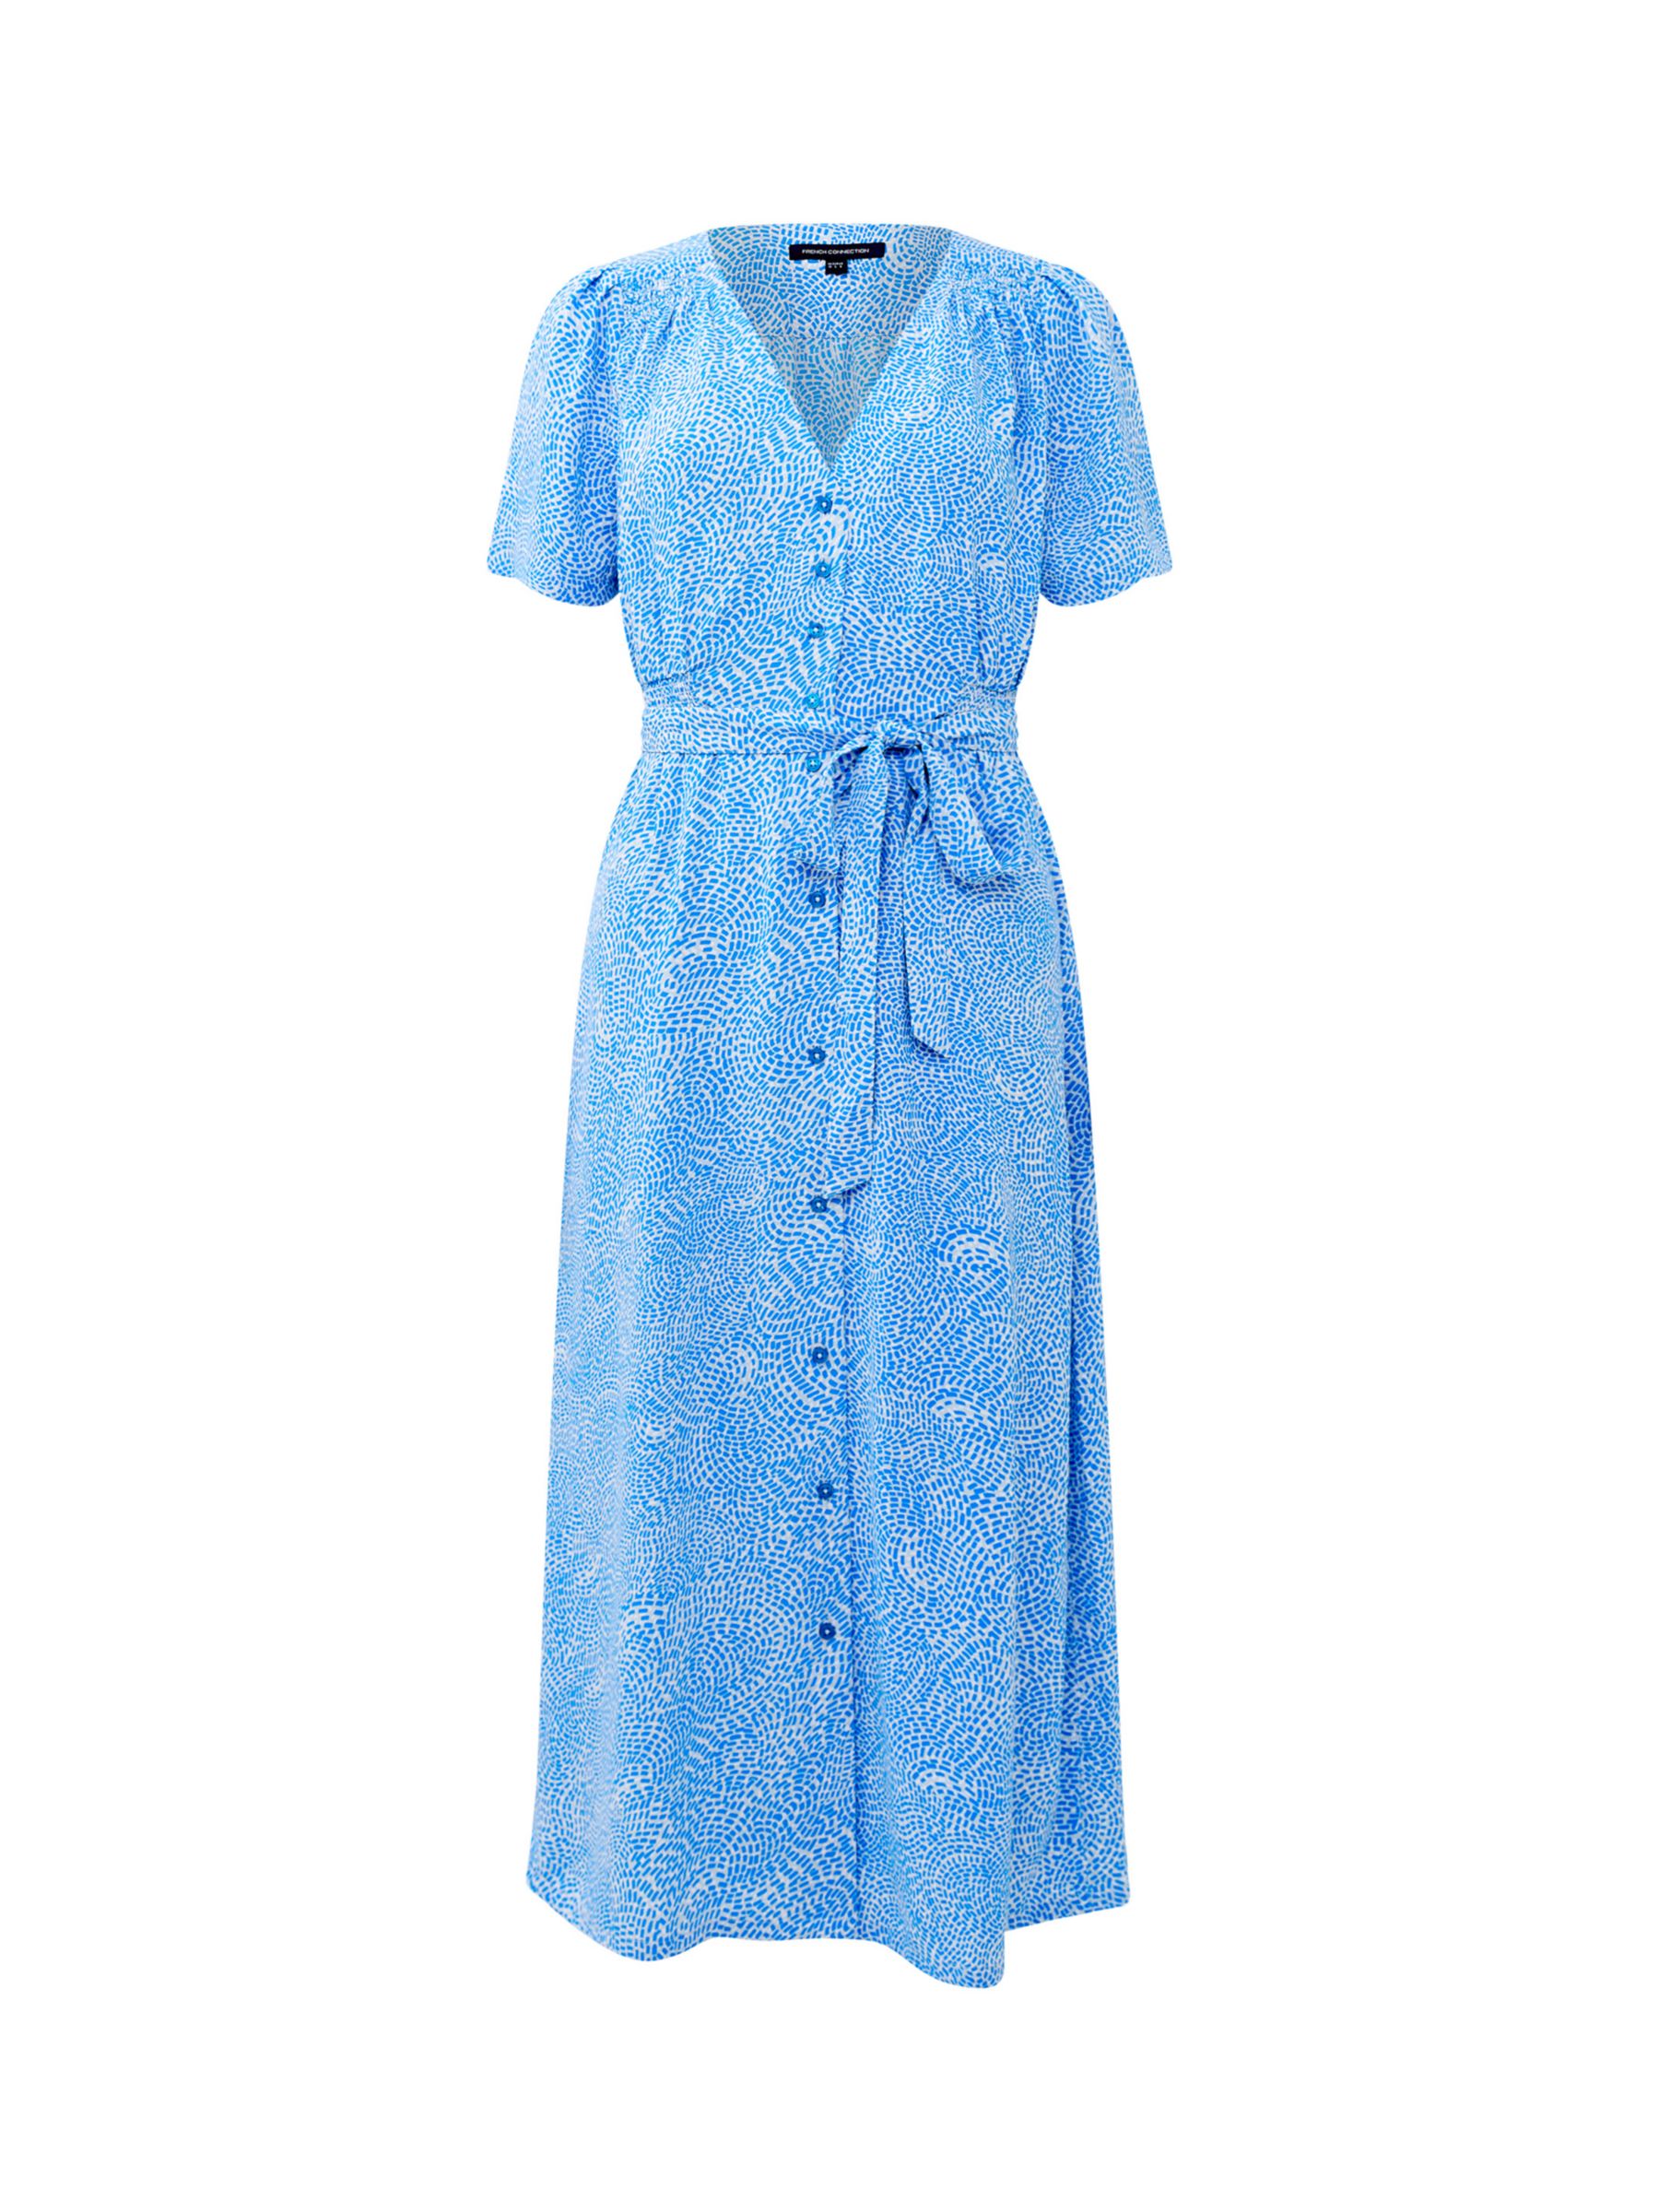 Buy French Connection Bernice Elitan Abstract Print Midi Dress, Blue Mist Online at johnlewis.com